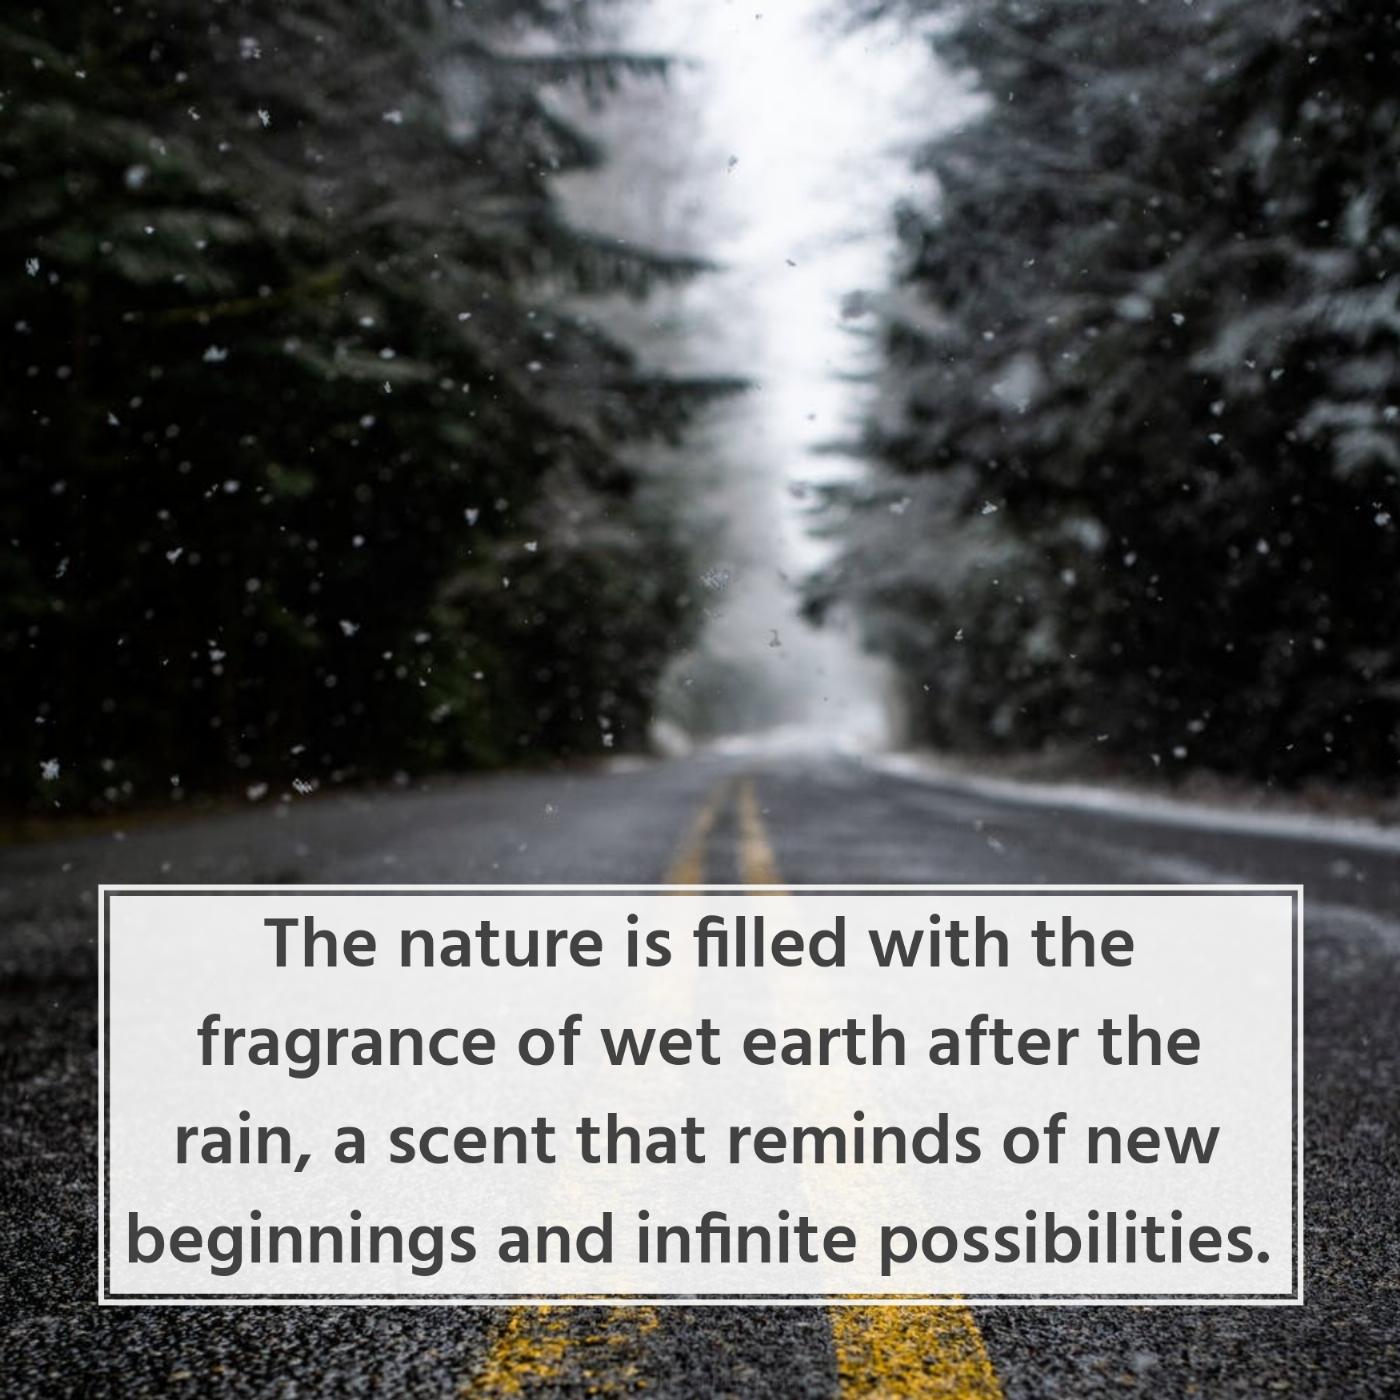 The nature is filled with the fragrance of wet earth after the rain